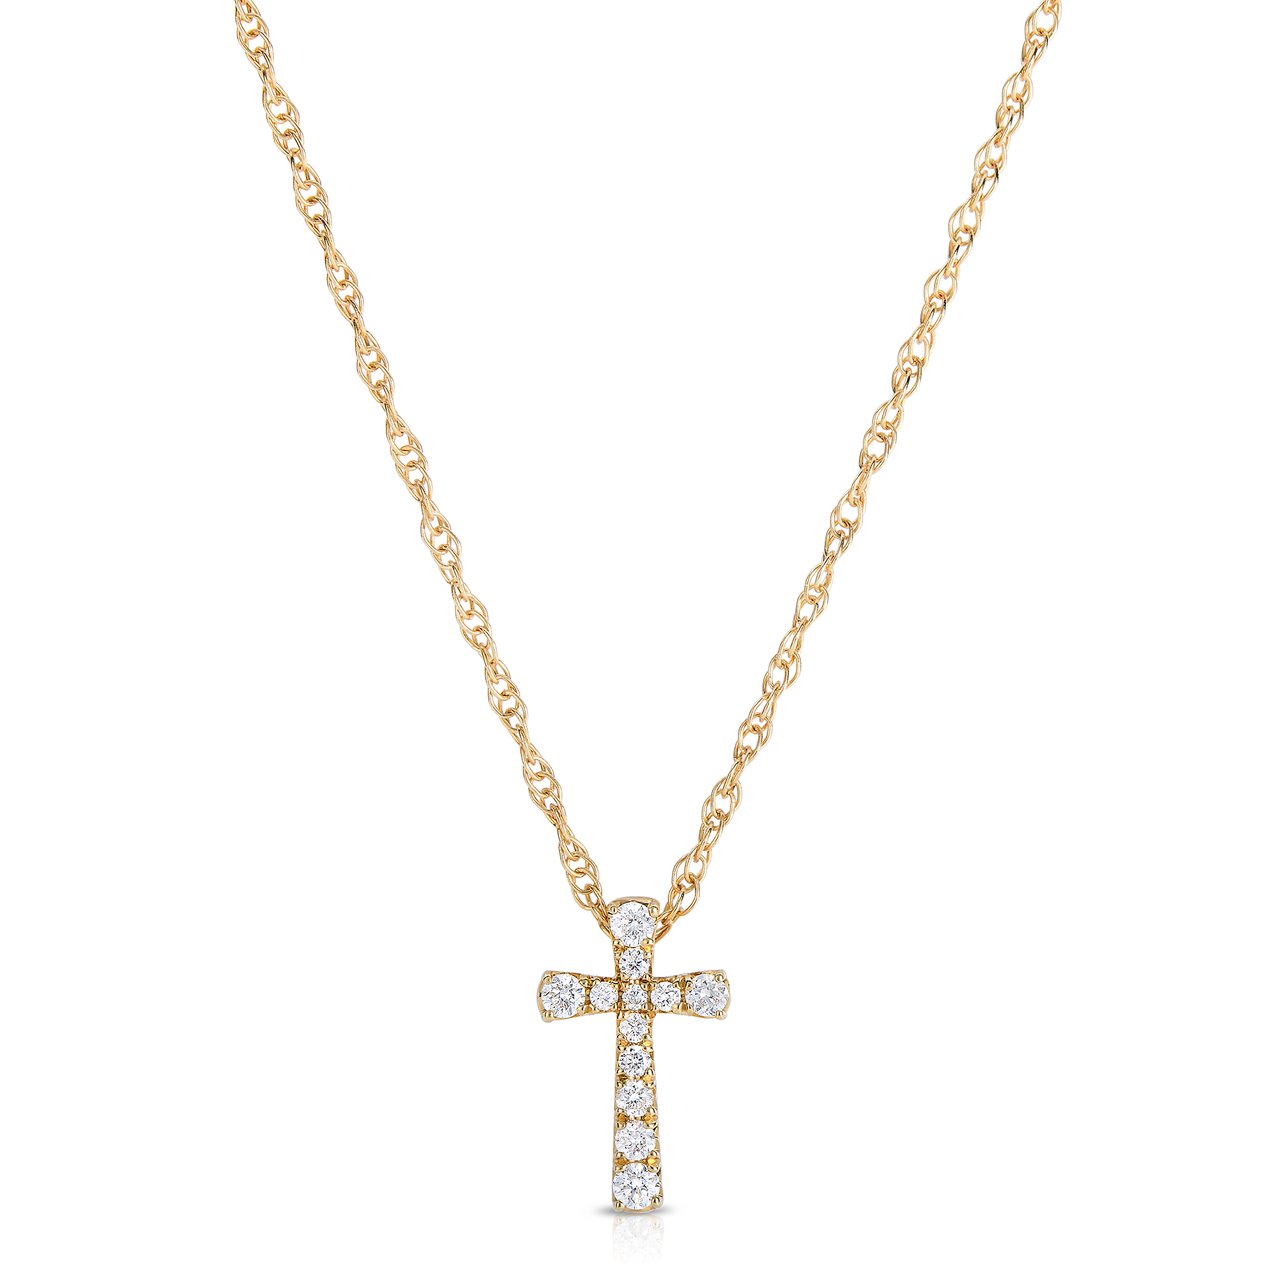 Sabel Collection 14K Yellow Gold Cross Pendant Necklace with Diamonds